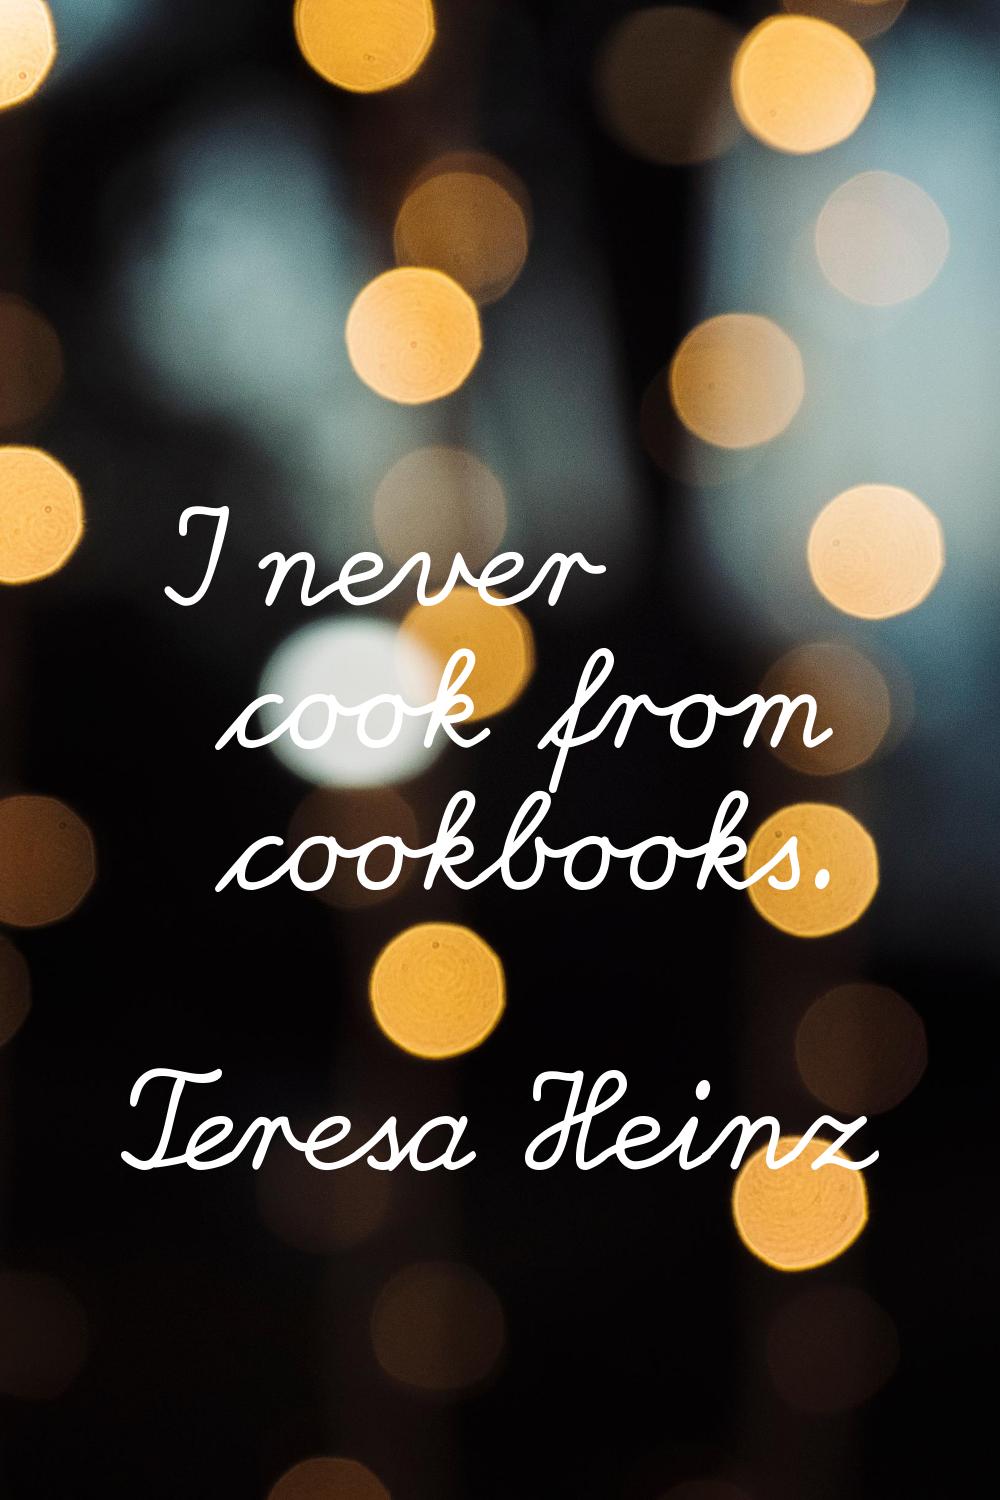 I never cook from cookbooks.